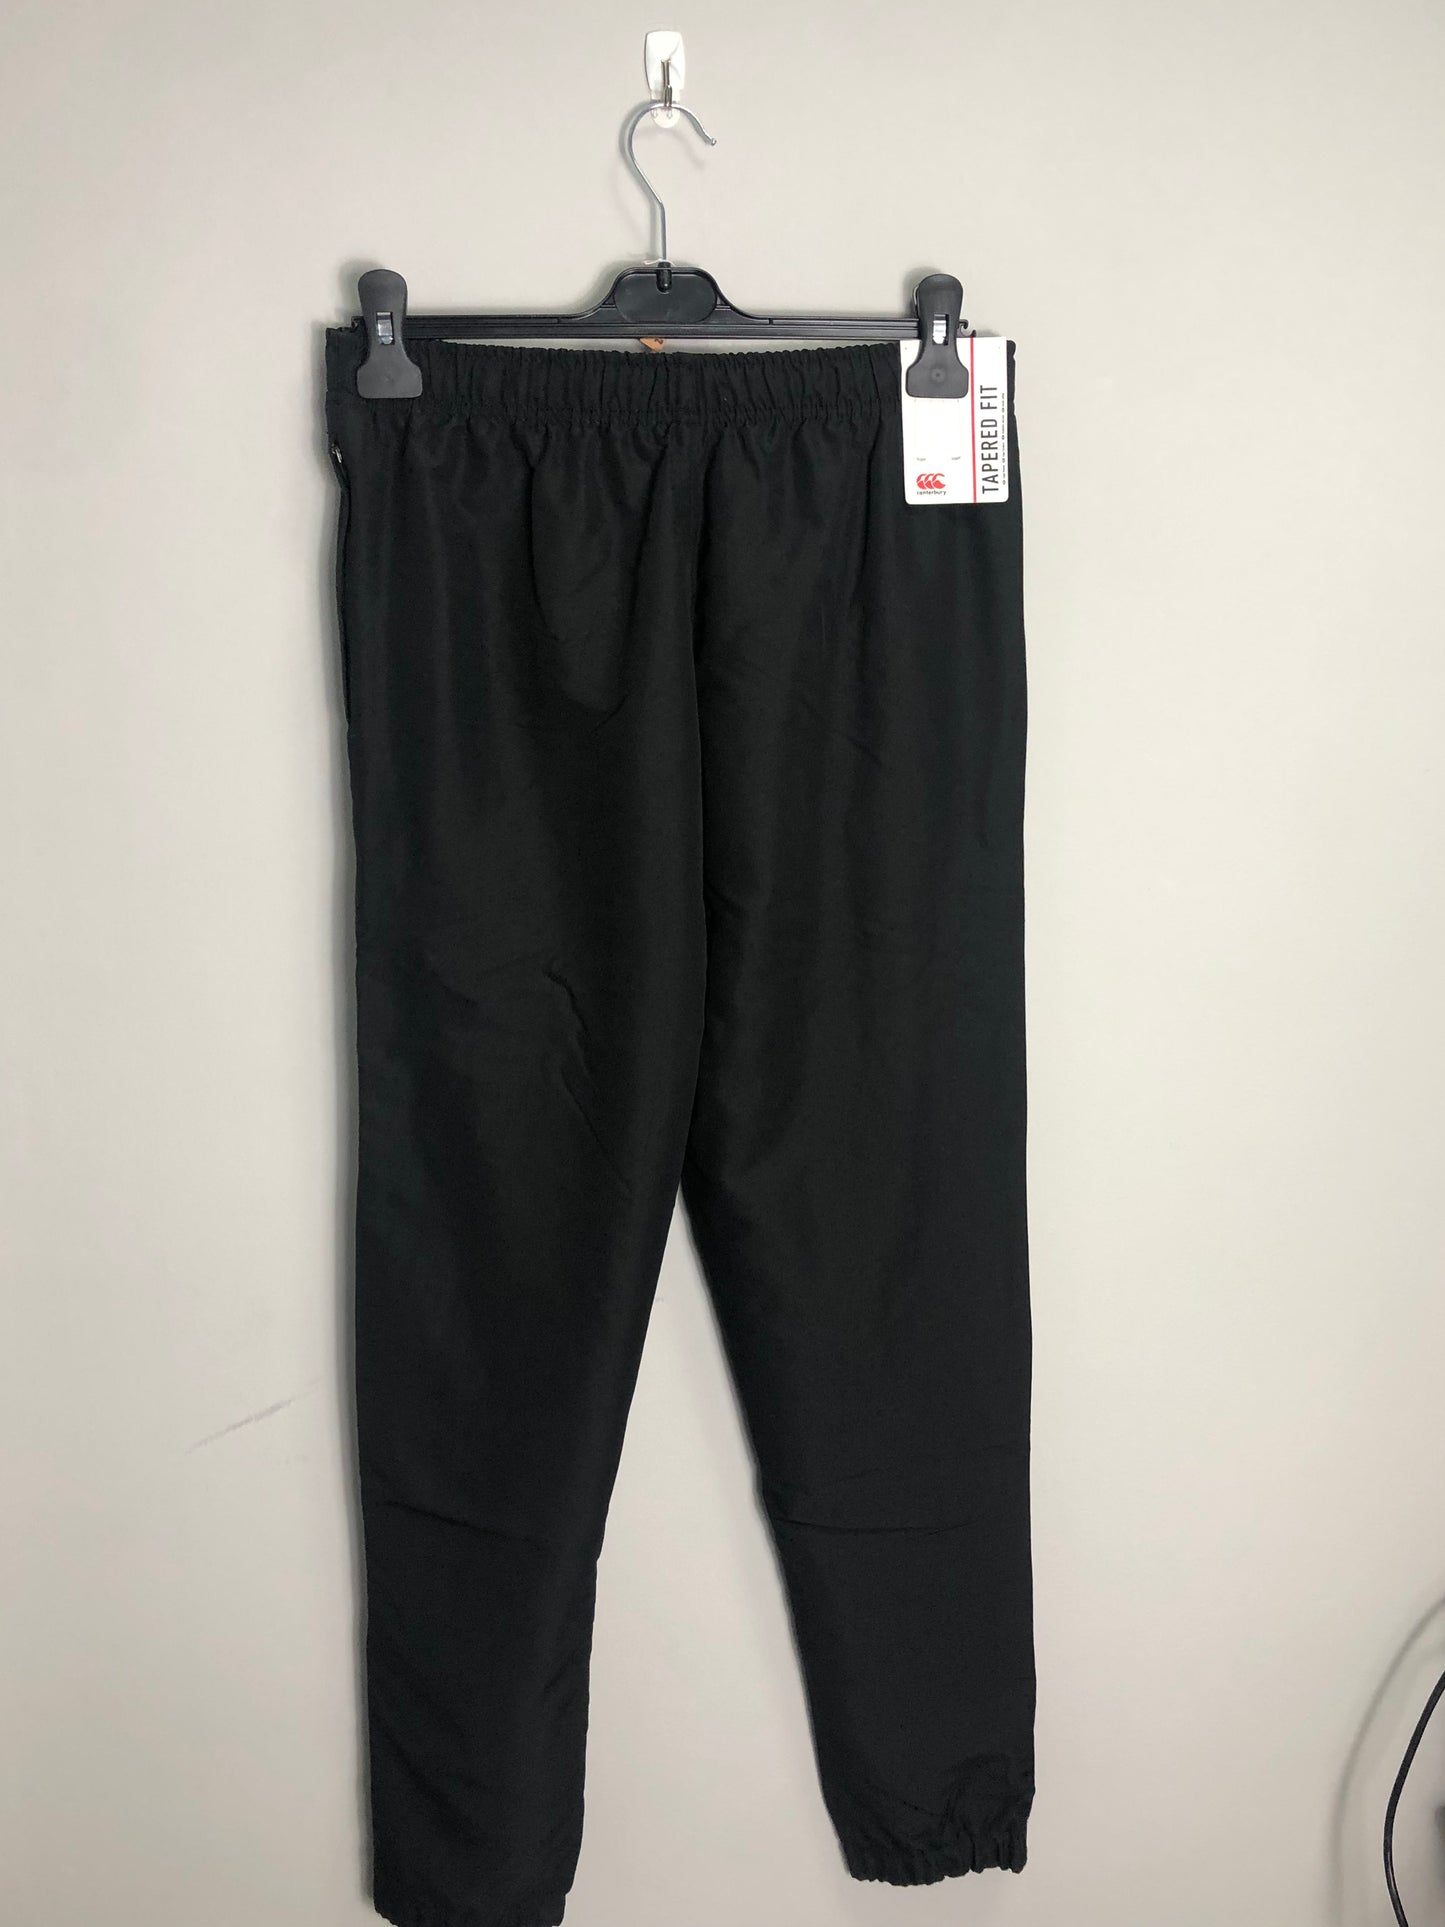 Canterbury Womens Size 8 Taped Tracksuit Bottoms